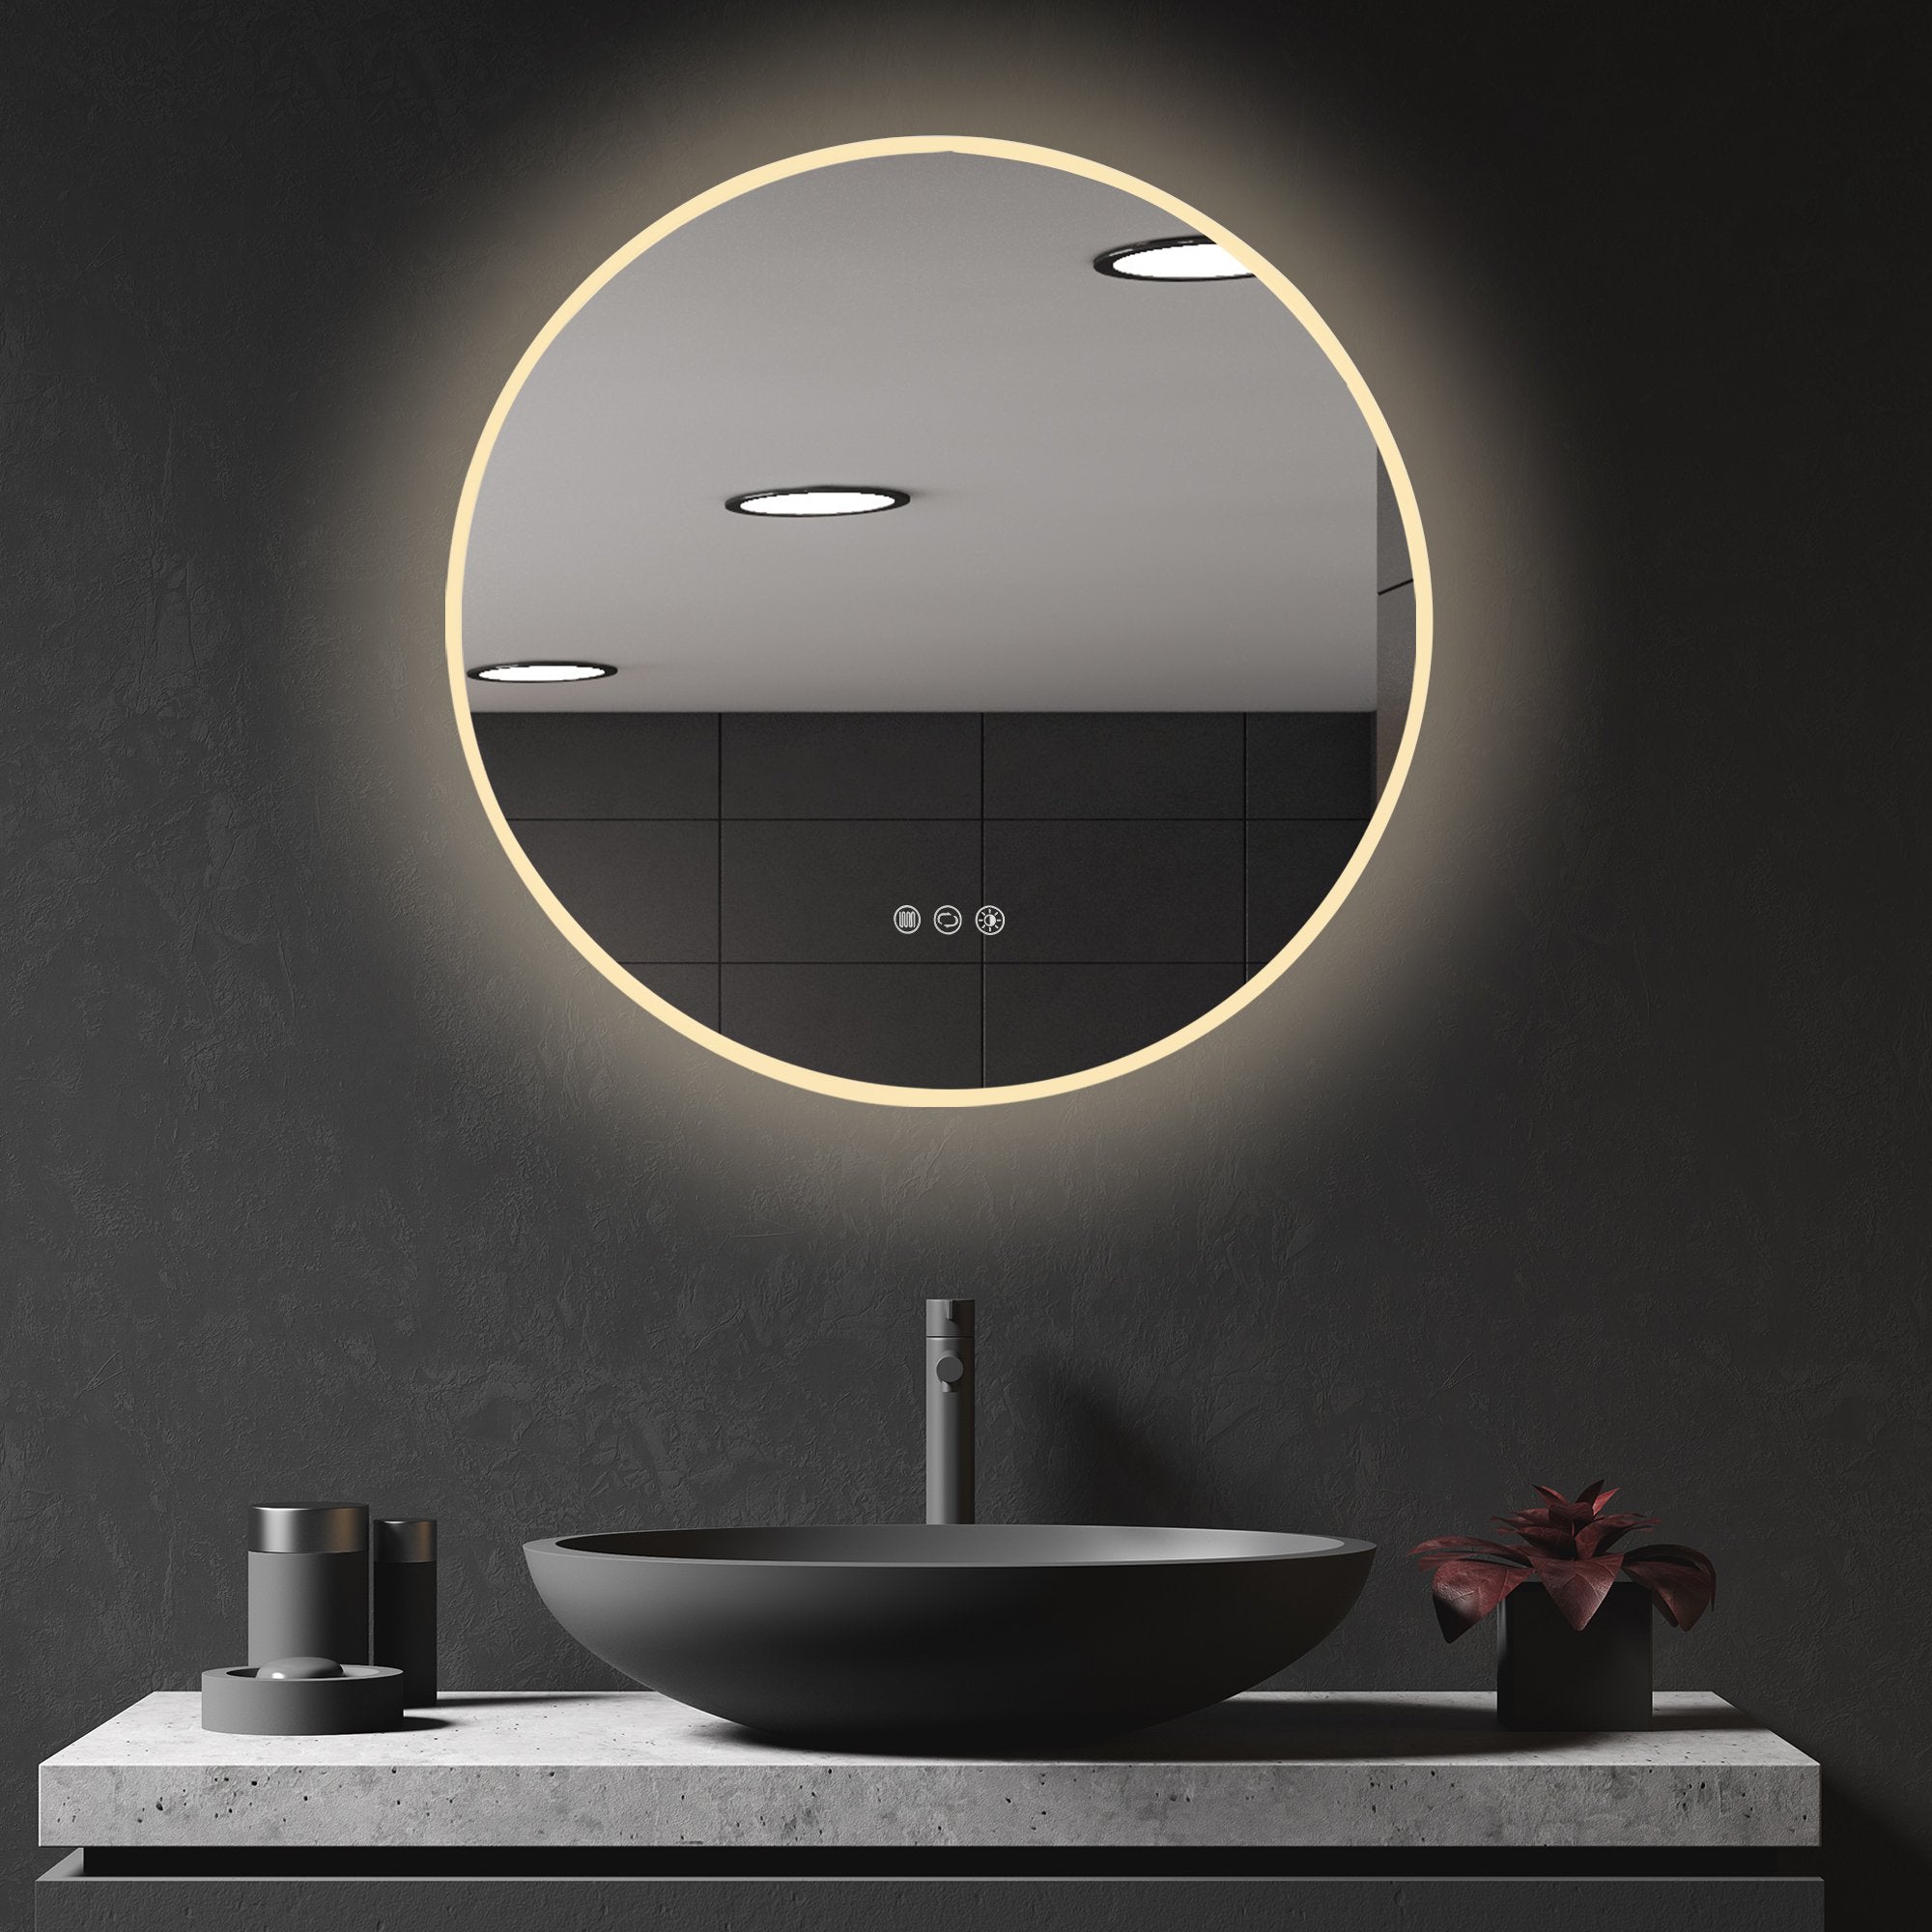 24''x24'' Round LED Bathroom Mirror with Defogging Function and 3 Color White Temperatures